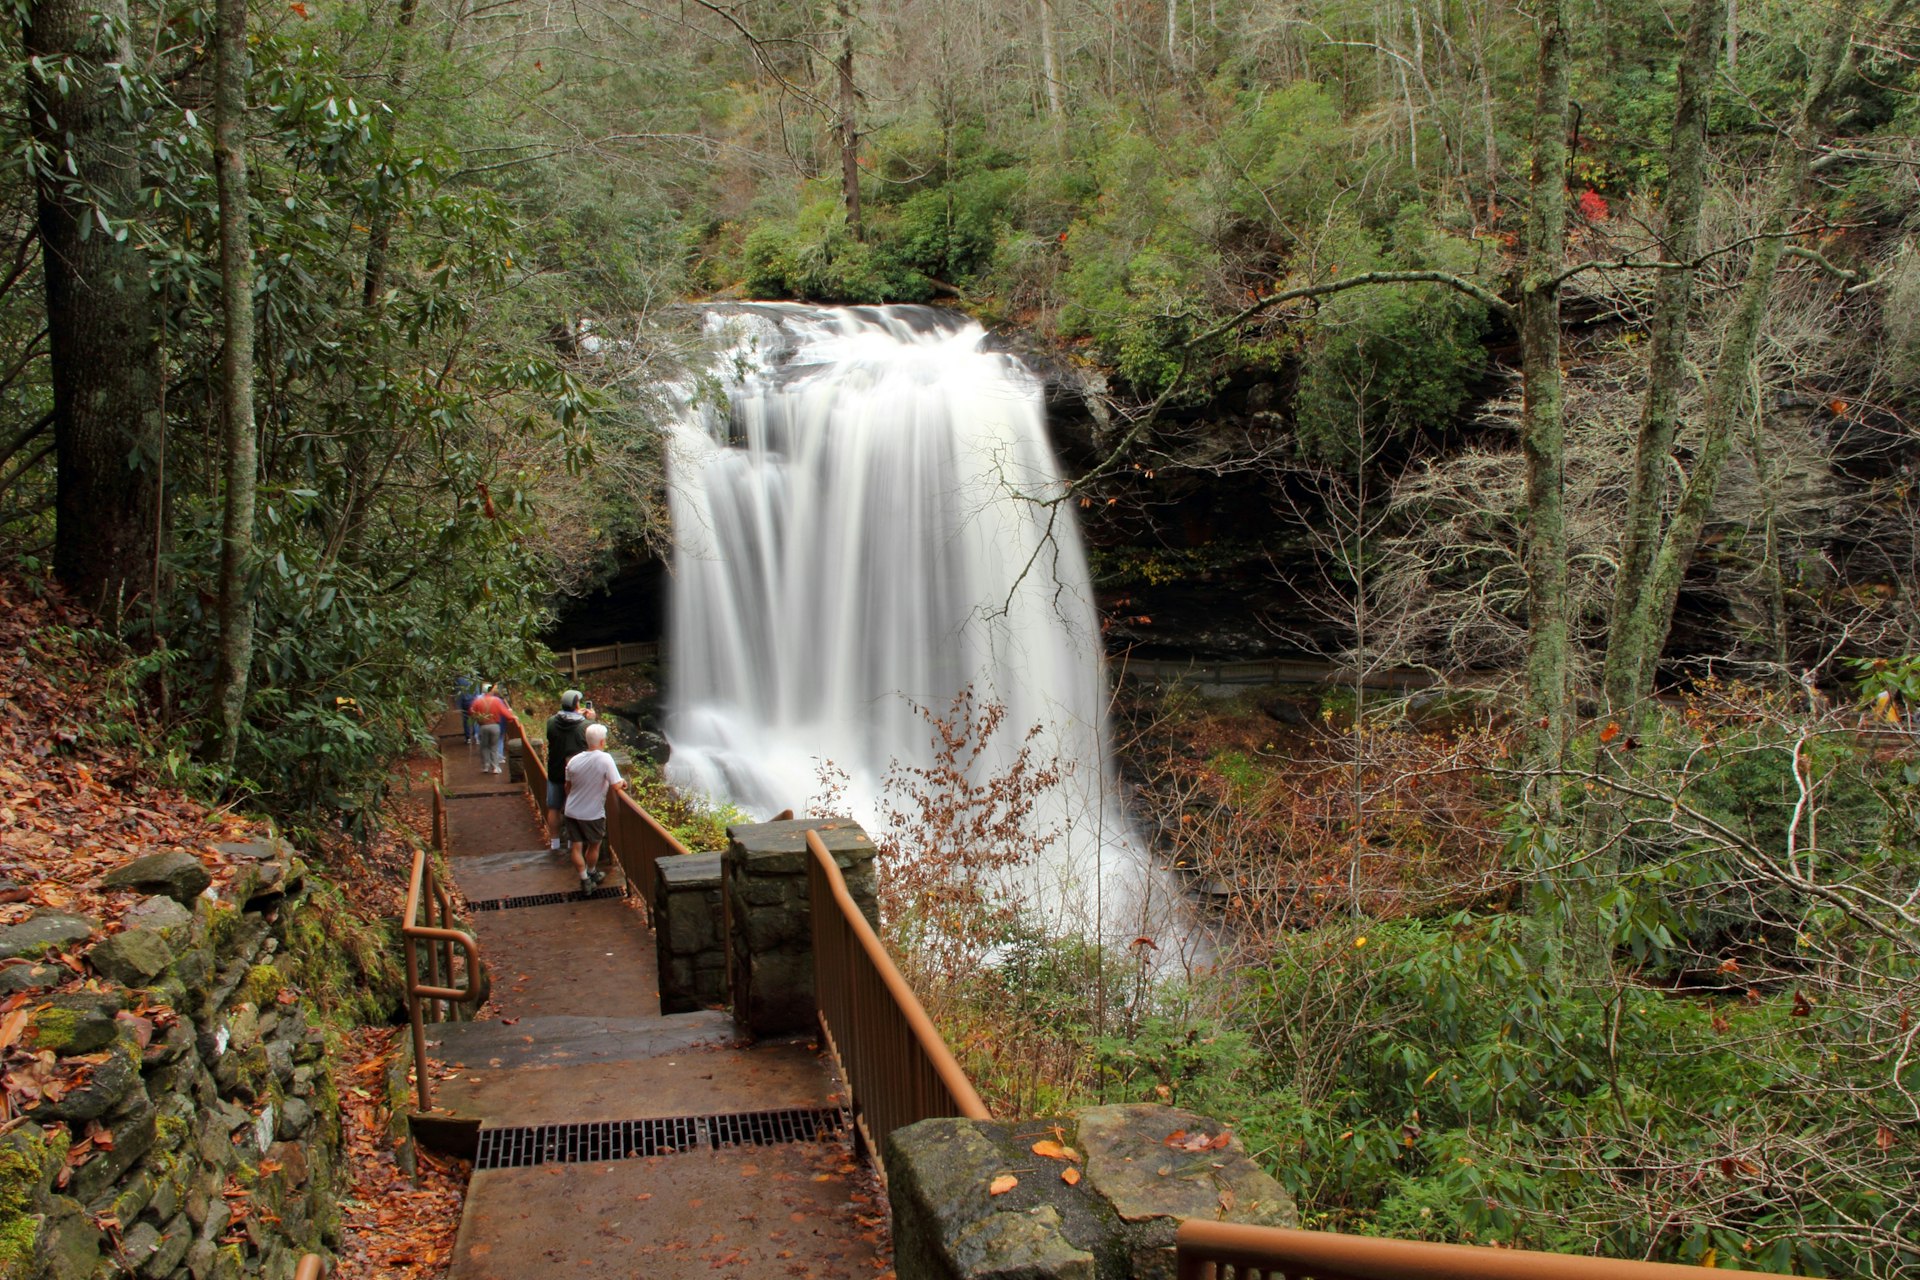 People view a waterfall from a path through woodland